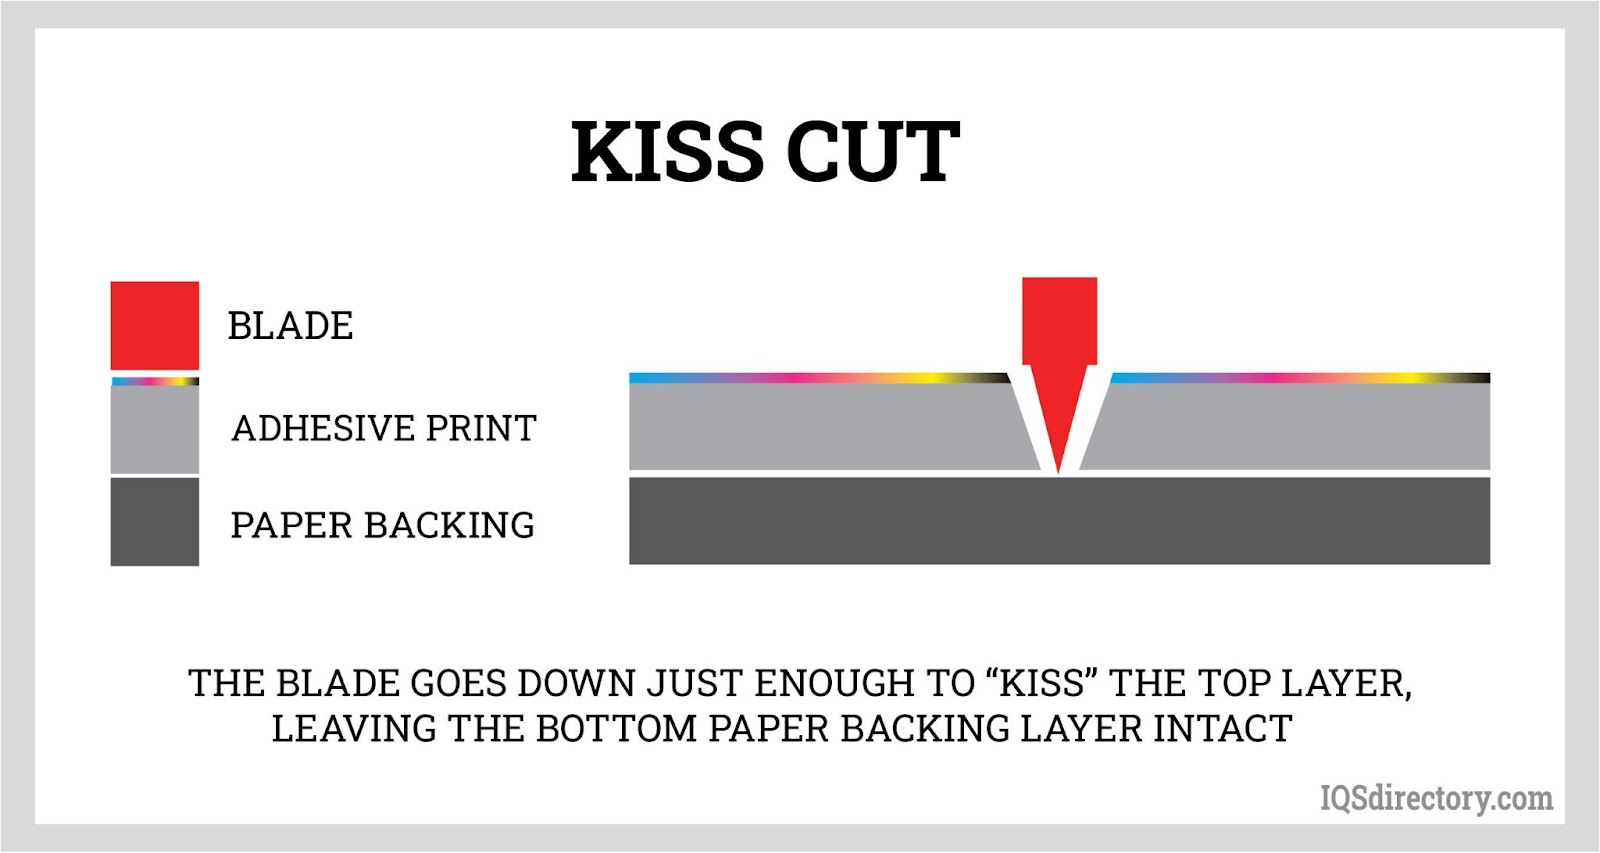 How To Make Kiss Cut & Die Cut Stickers Using HTVRont's Printable